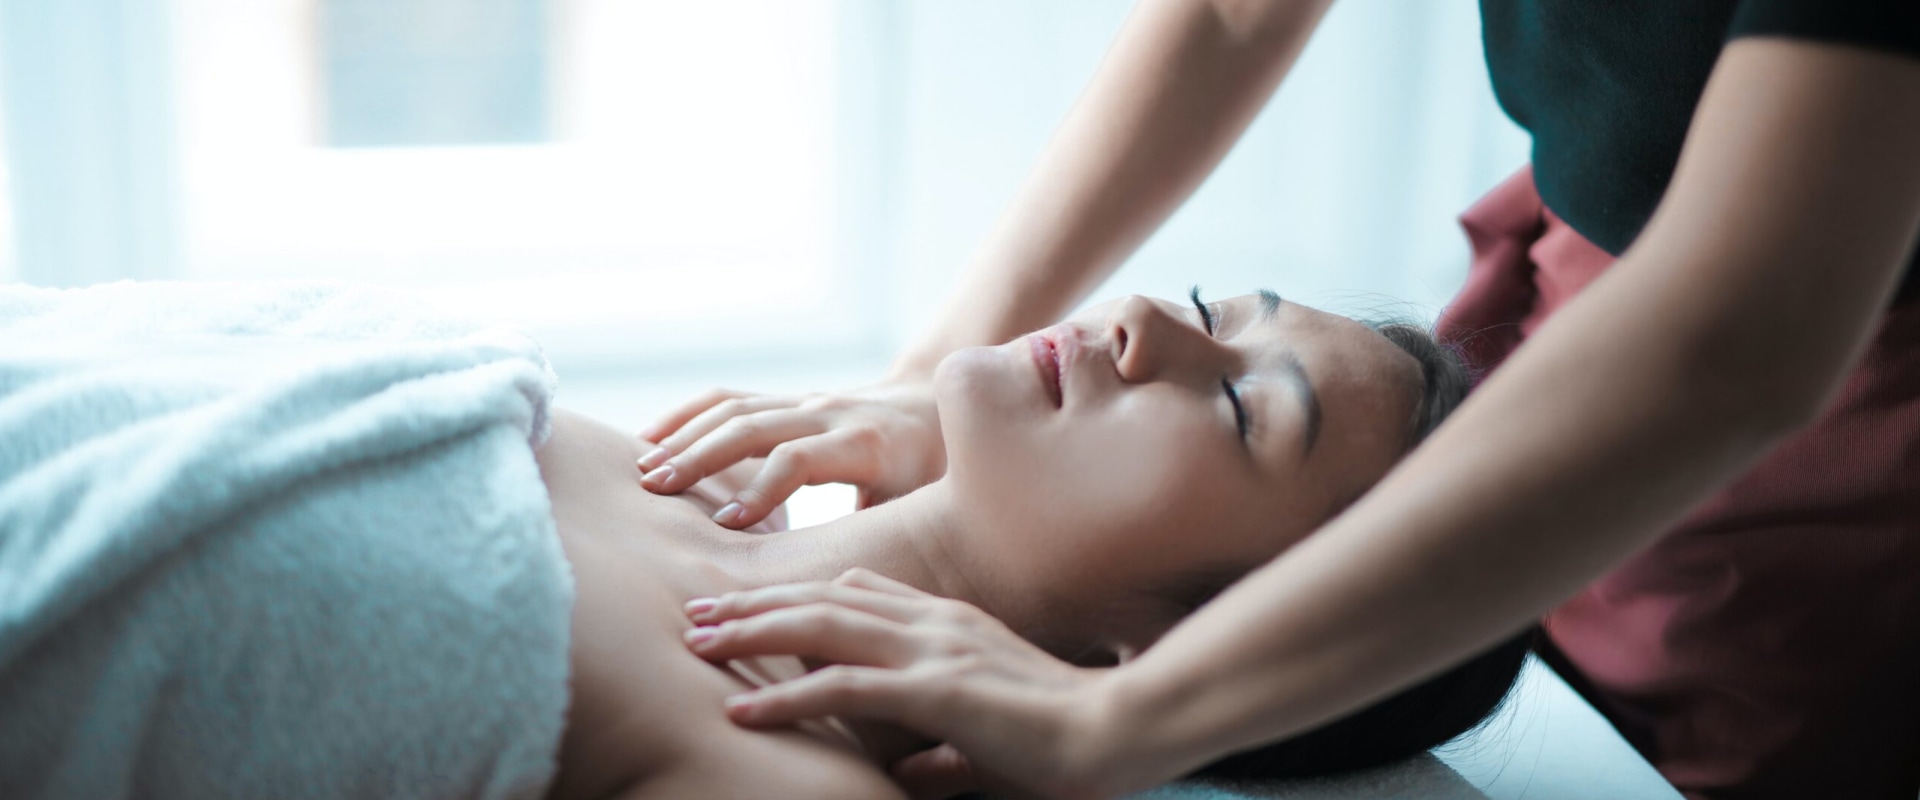 Combining Massage Therapy And Chiropractic Care: A Safe And Effective Option For Headache Relief In Toronto